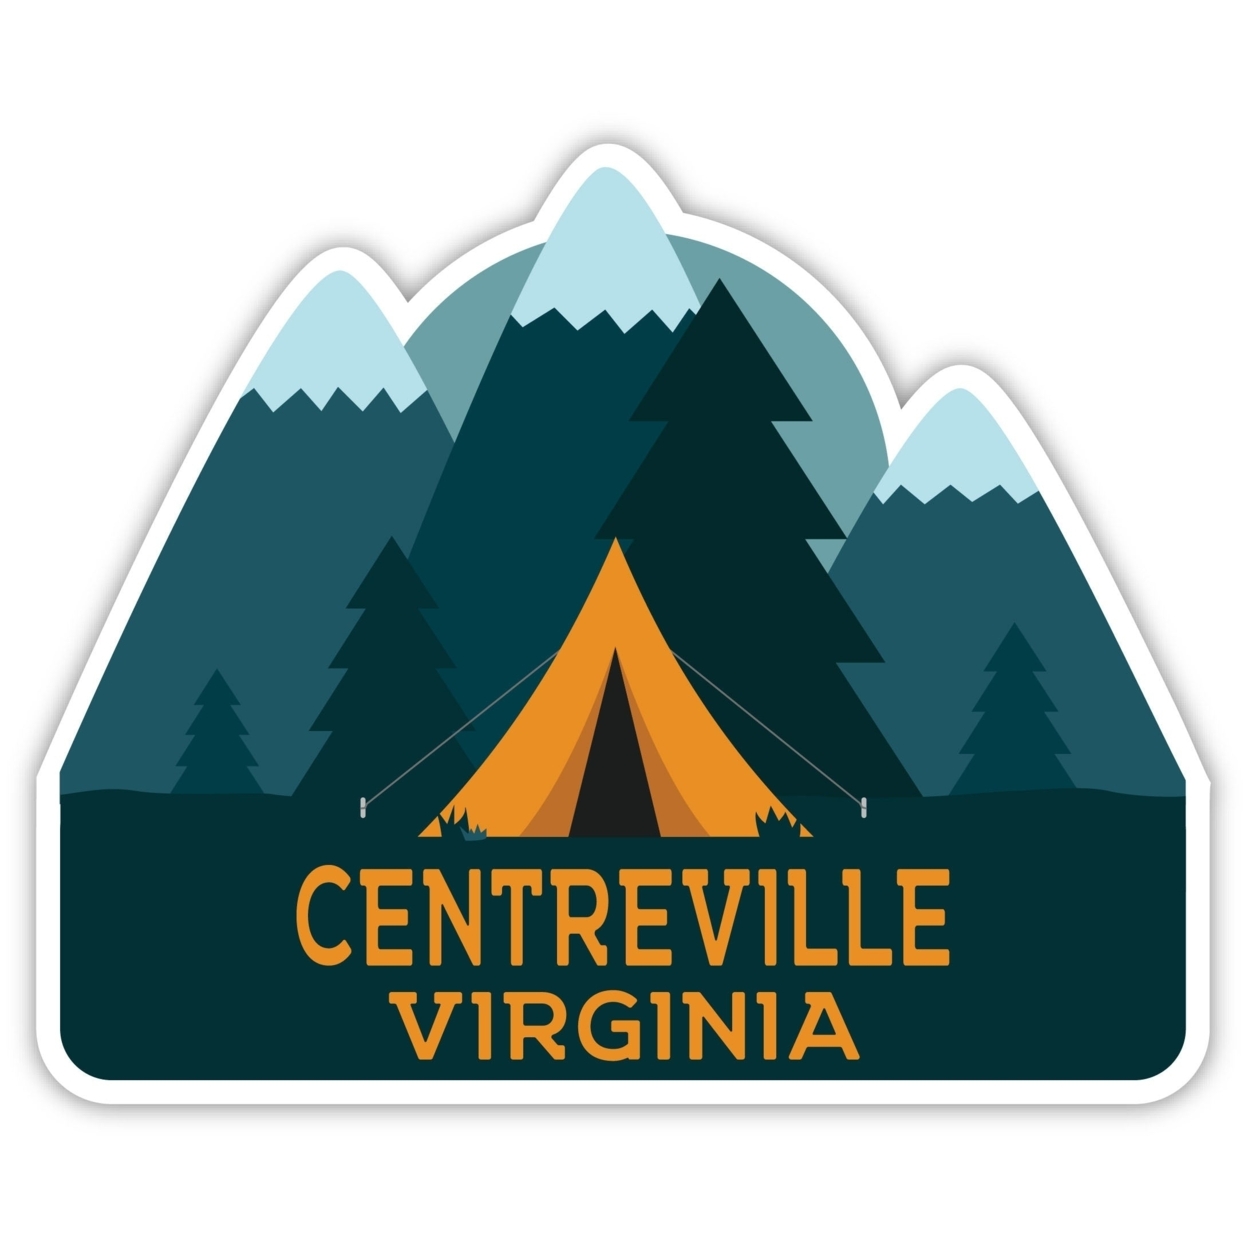 Centreville Virginia Souvenir Decorative Stickers (Choose Theme And Size) - 4-Pack, 2-Inch, Tent